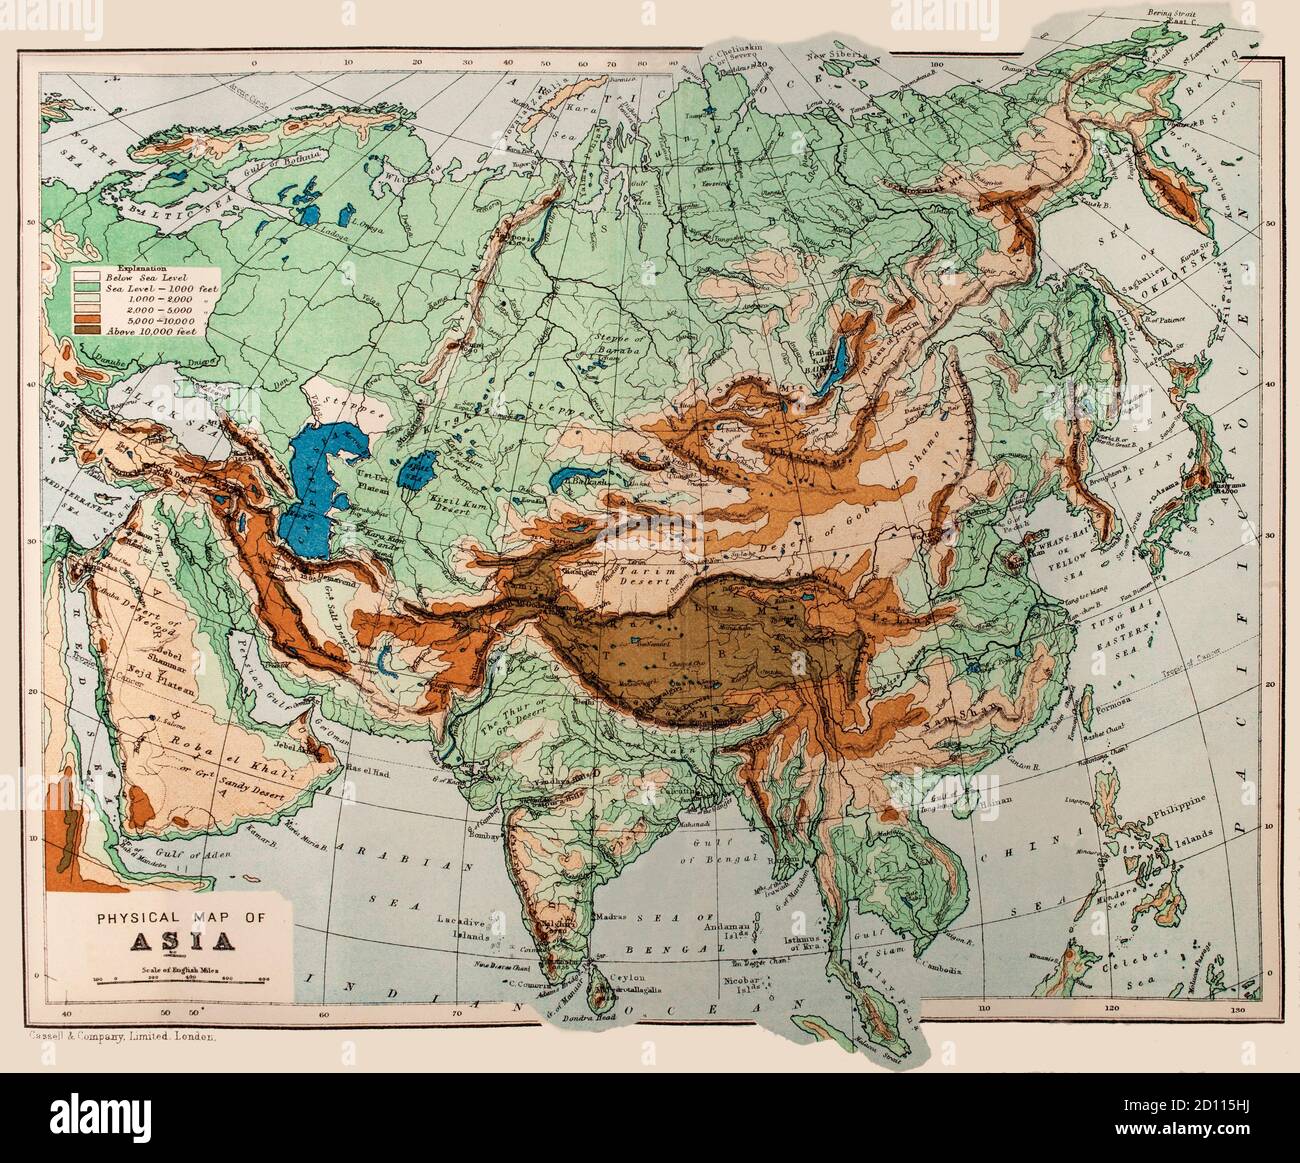 A late 19th Century physical map of Asia, the Earth's largest and most populous continent, located primarily in the Eastern and Northern Hemispheres. It covers an area of about 30% of Earth's total land area and 8.7% of the Earth's total surface area. The continent, which has long been home to the majority of the human population. Stock Photo